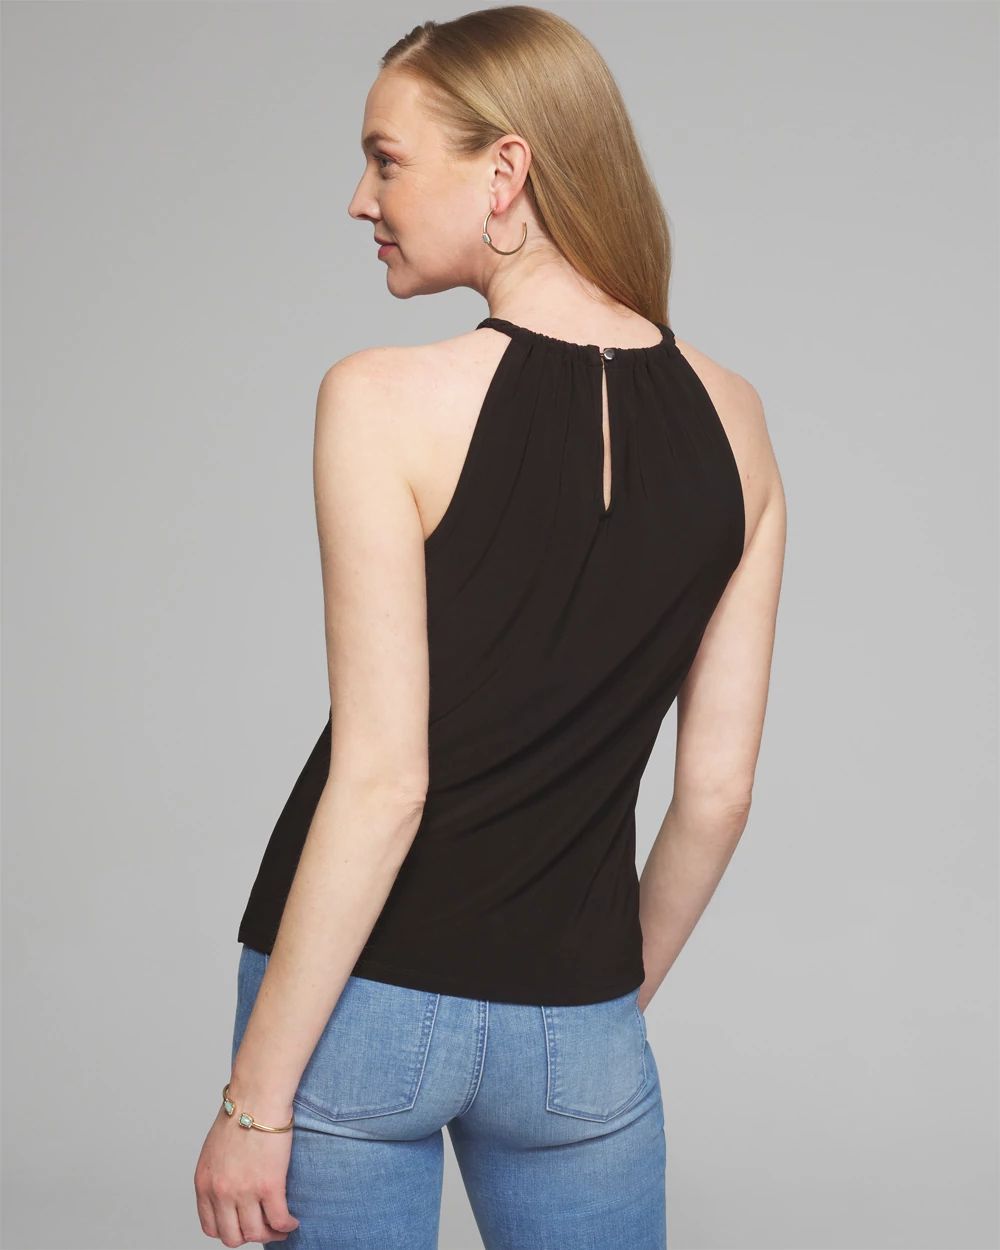 Outlet WHBM Braided Trim Halter Top click to view larger image.